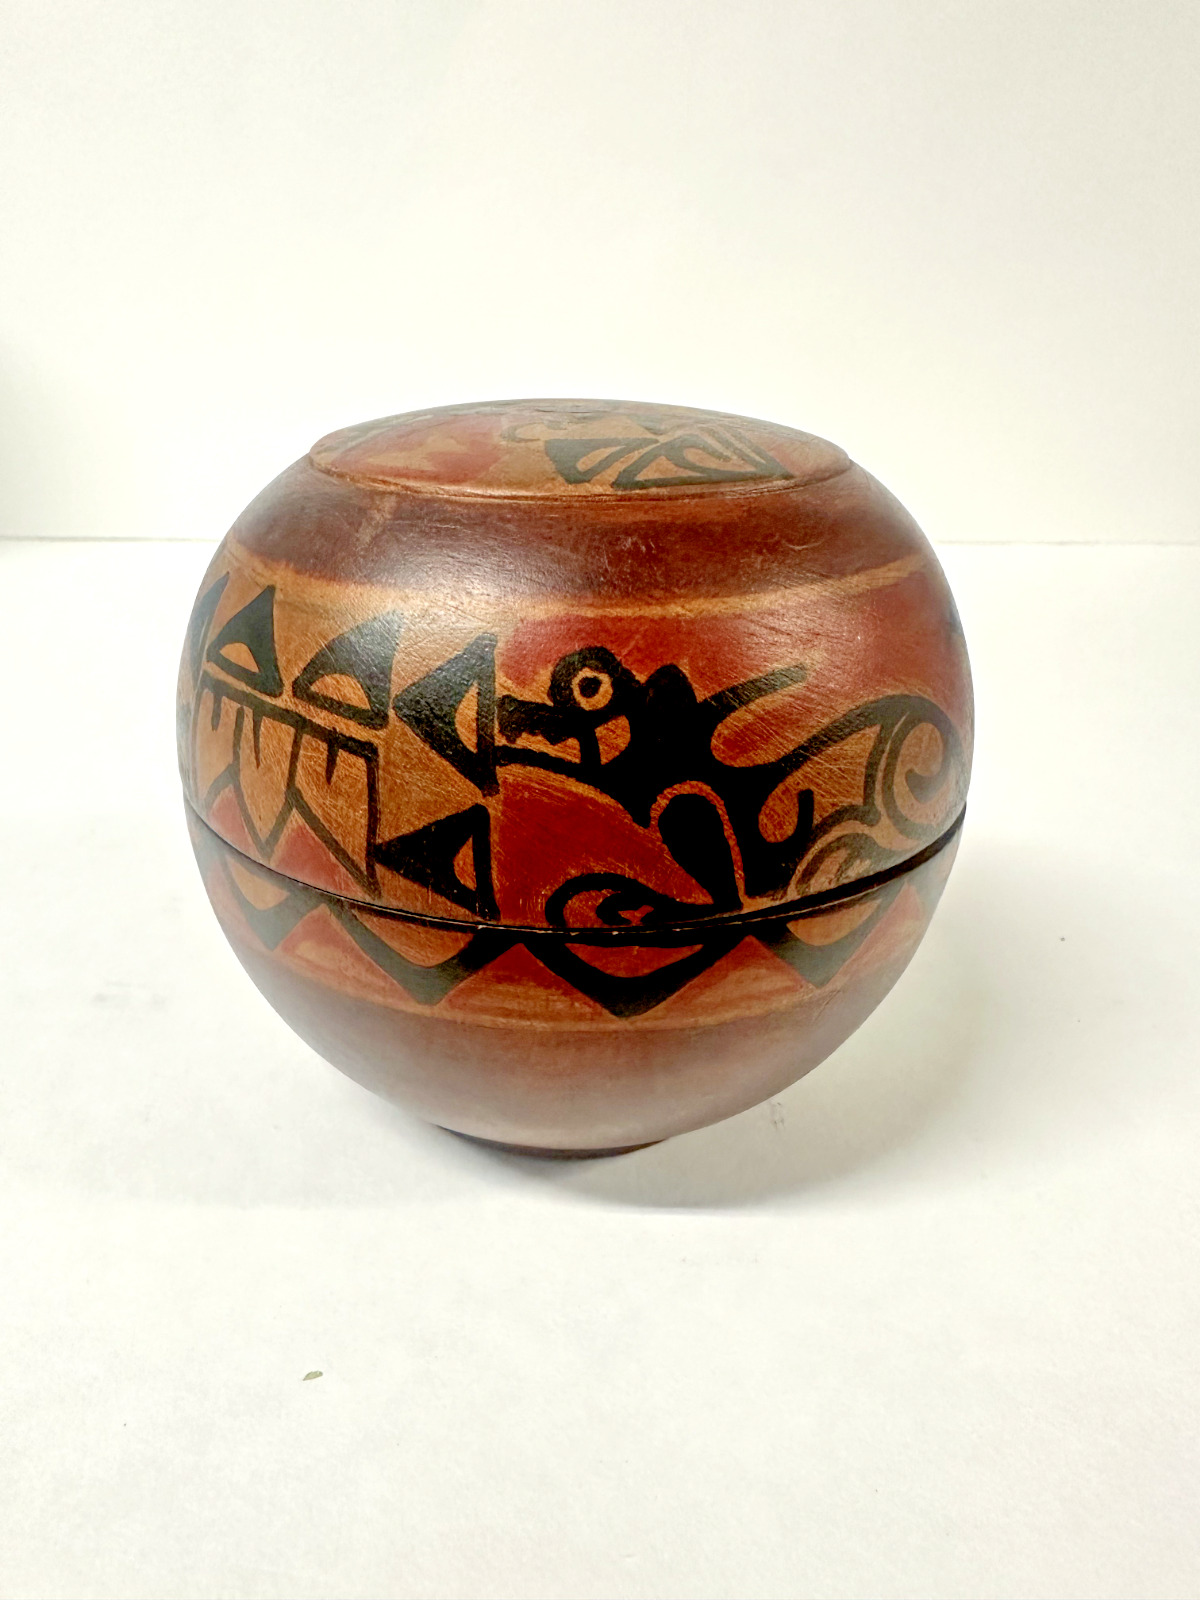 Vintage Hand-Carved Wooden Trinket Sphere with Hand-Painted Indigenous Art